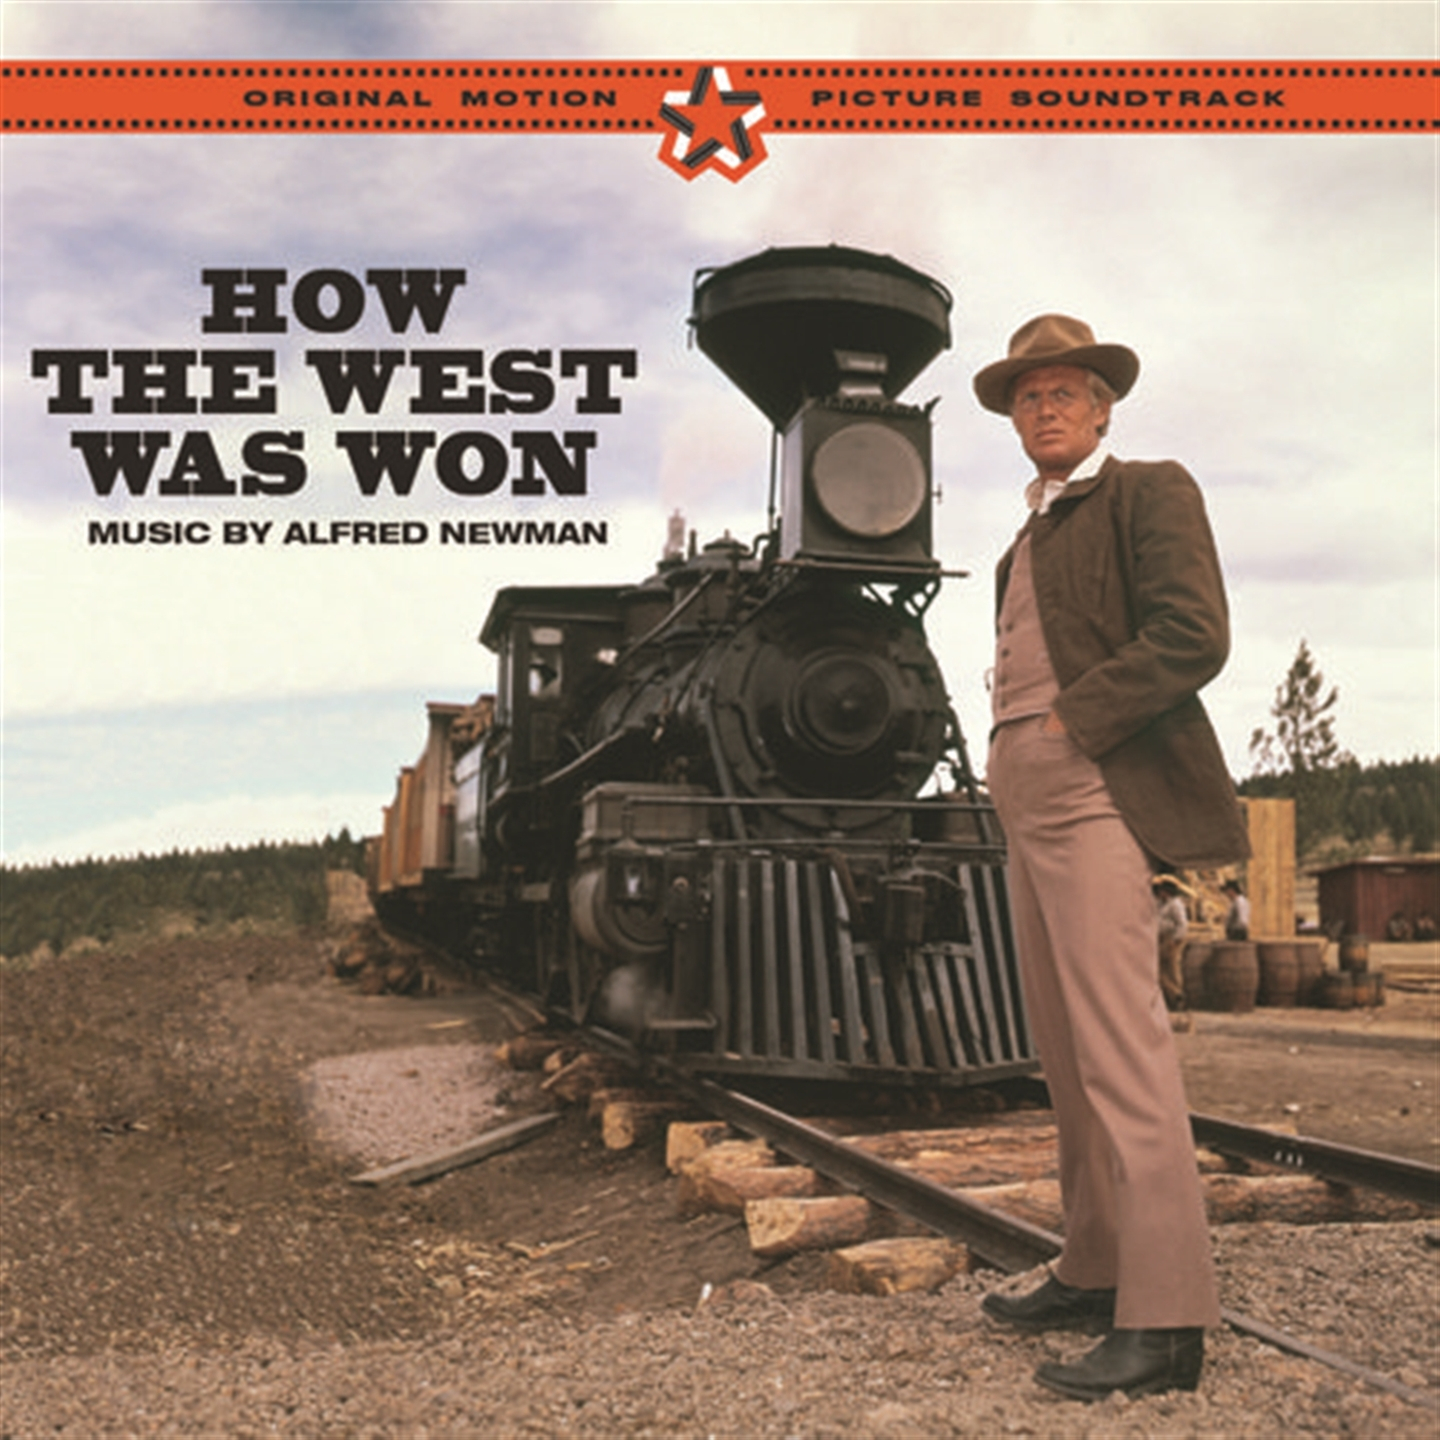 HOW THE WEST WAS WON - THE COMPLETE SOUNDTRACK